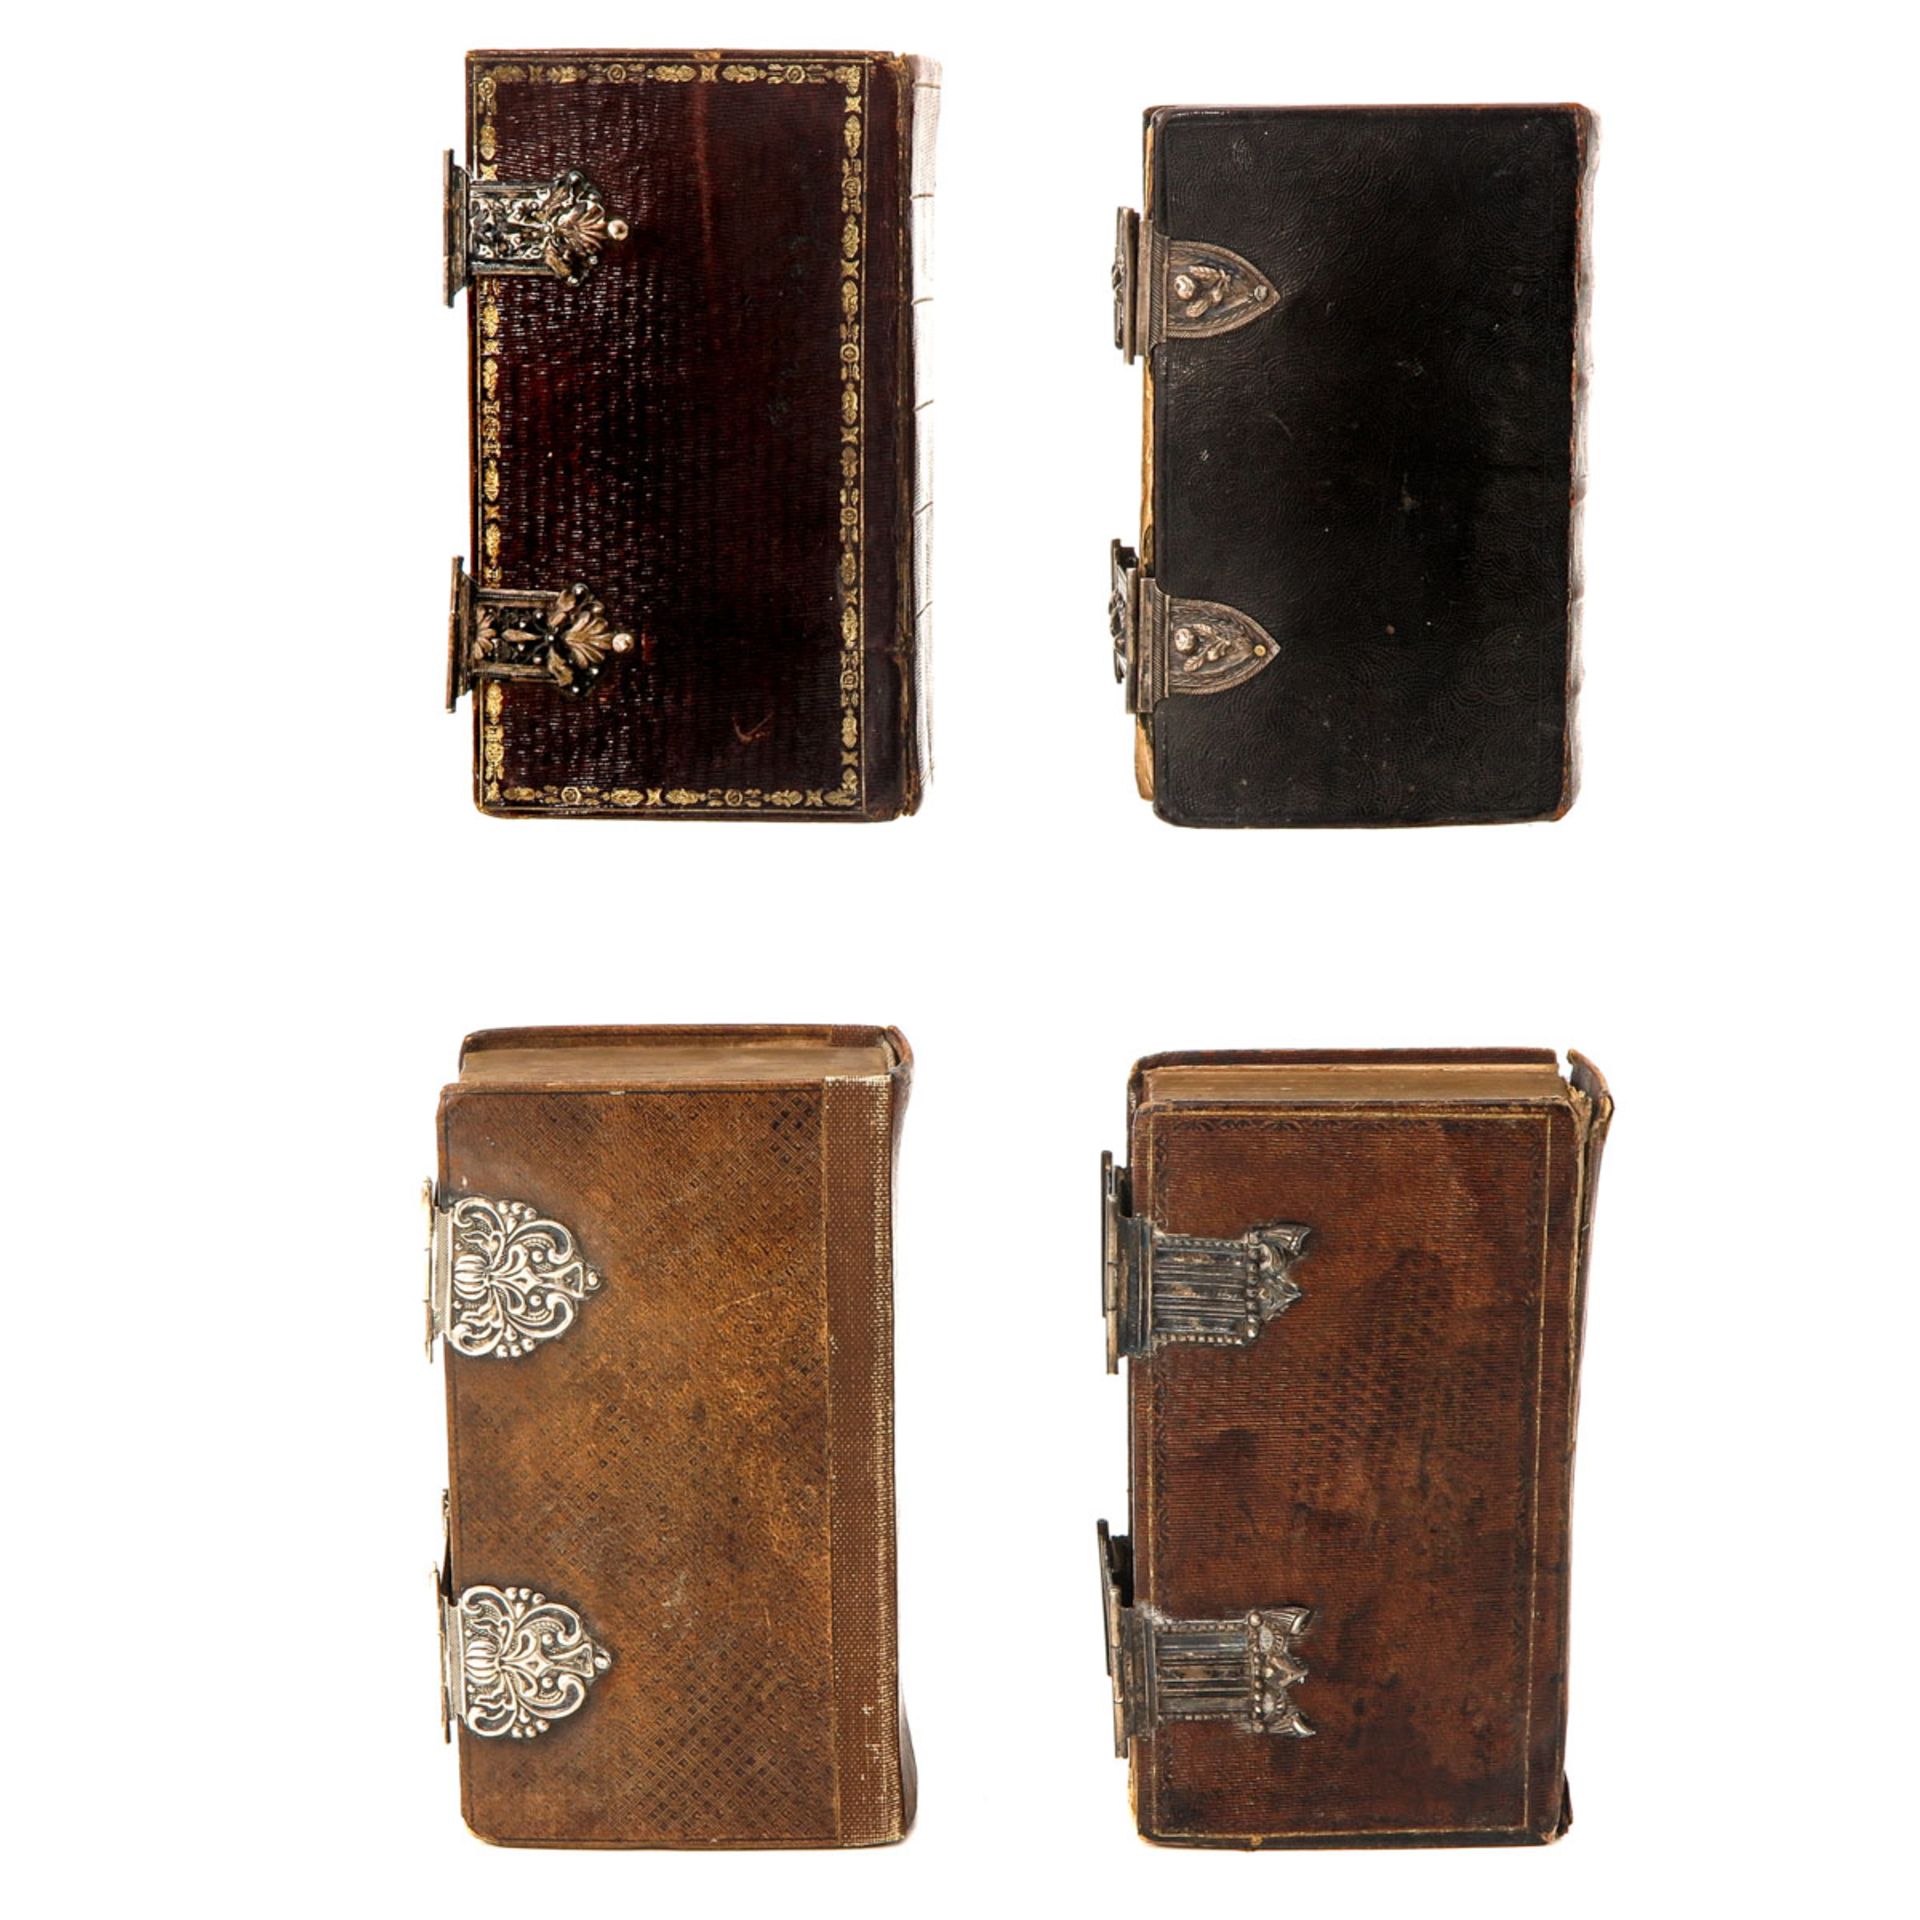 A Collection of 4 Bibles - Image 2 of 10